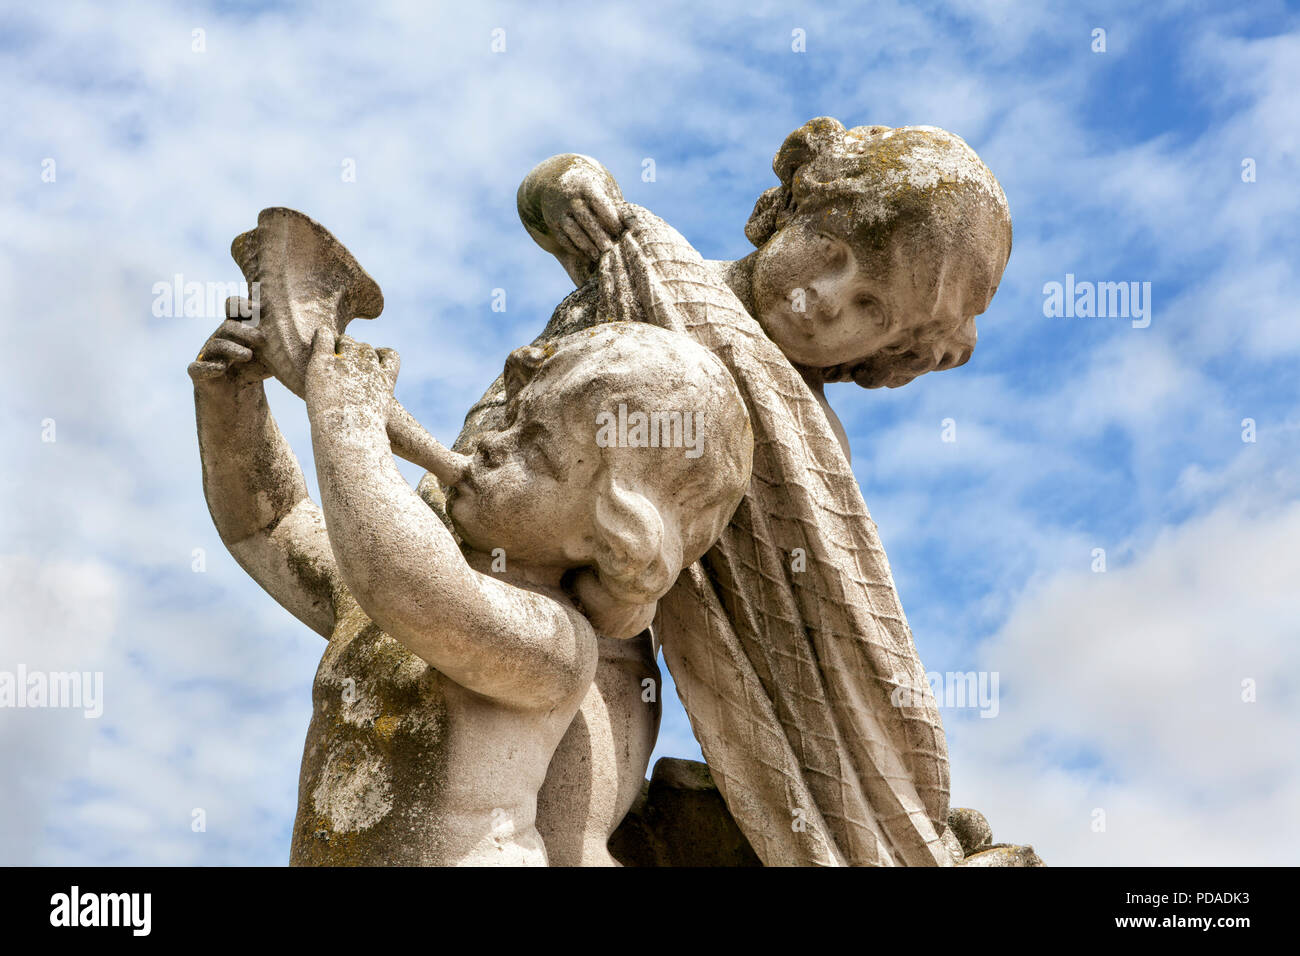 Baroque cherubs, sculpture at Nordkirchen Moated Palace, Germany Stock Photo